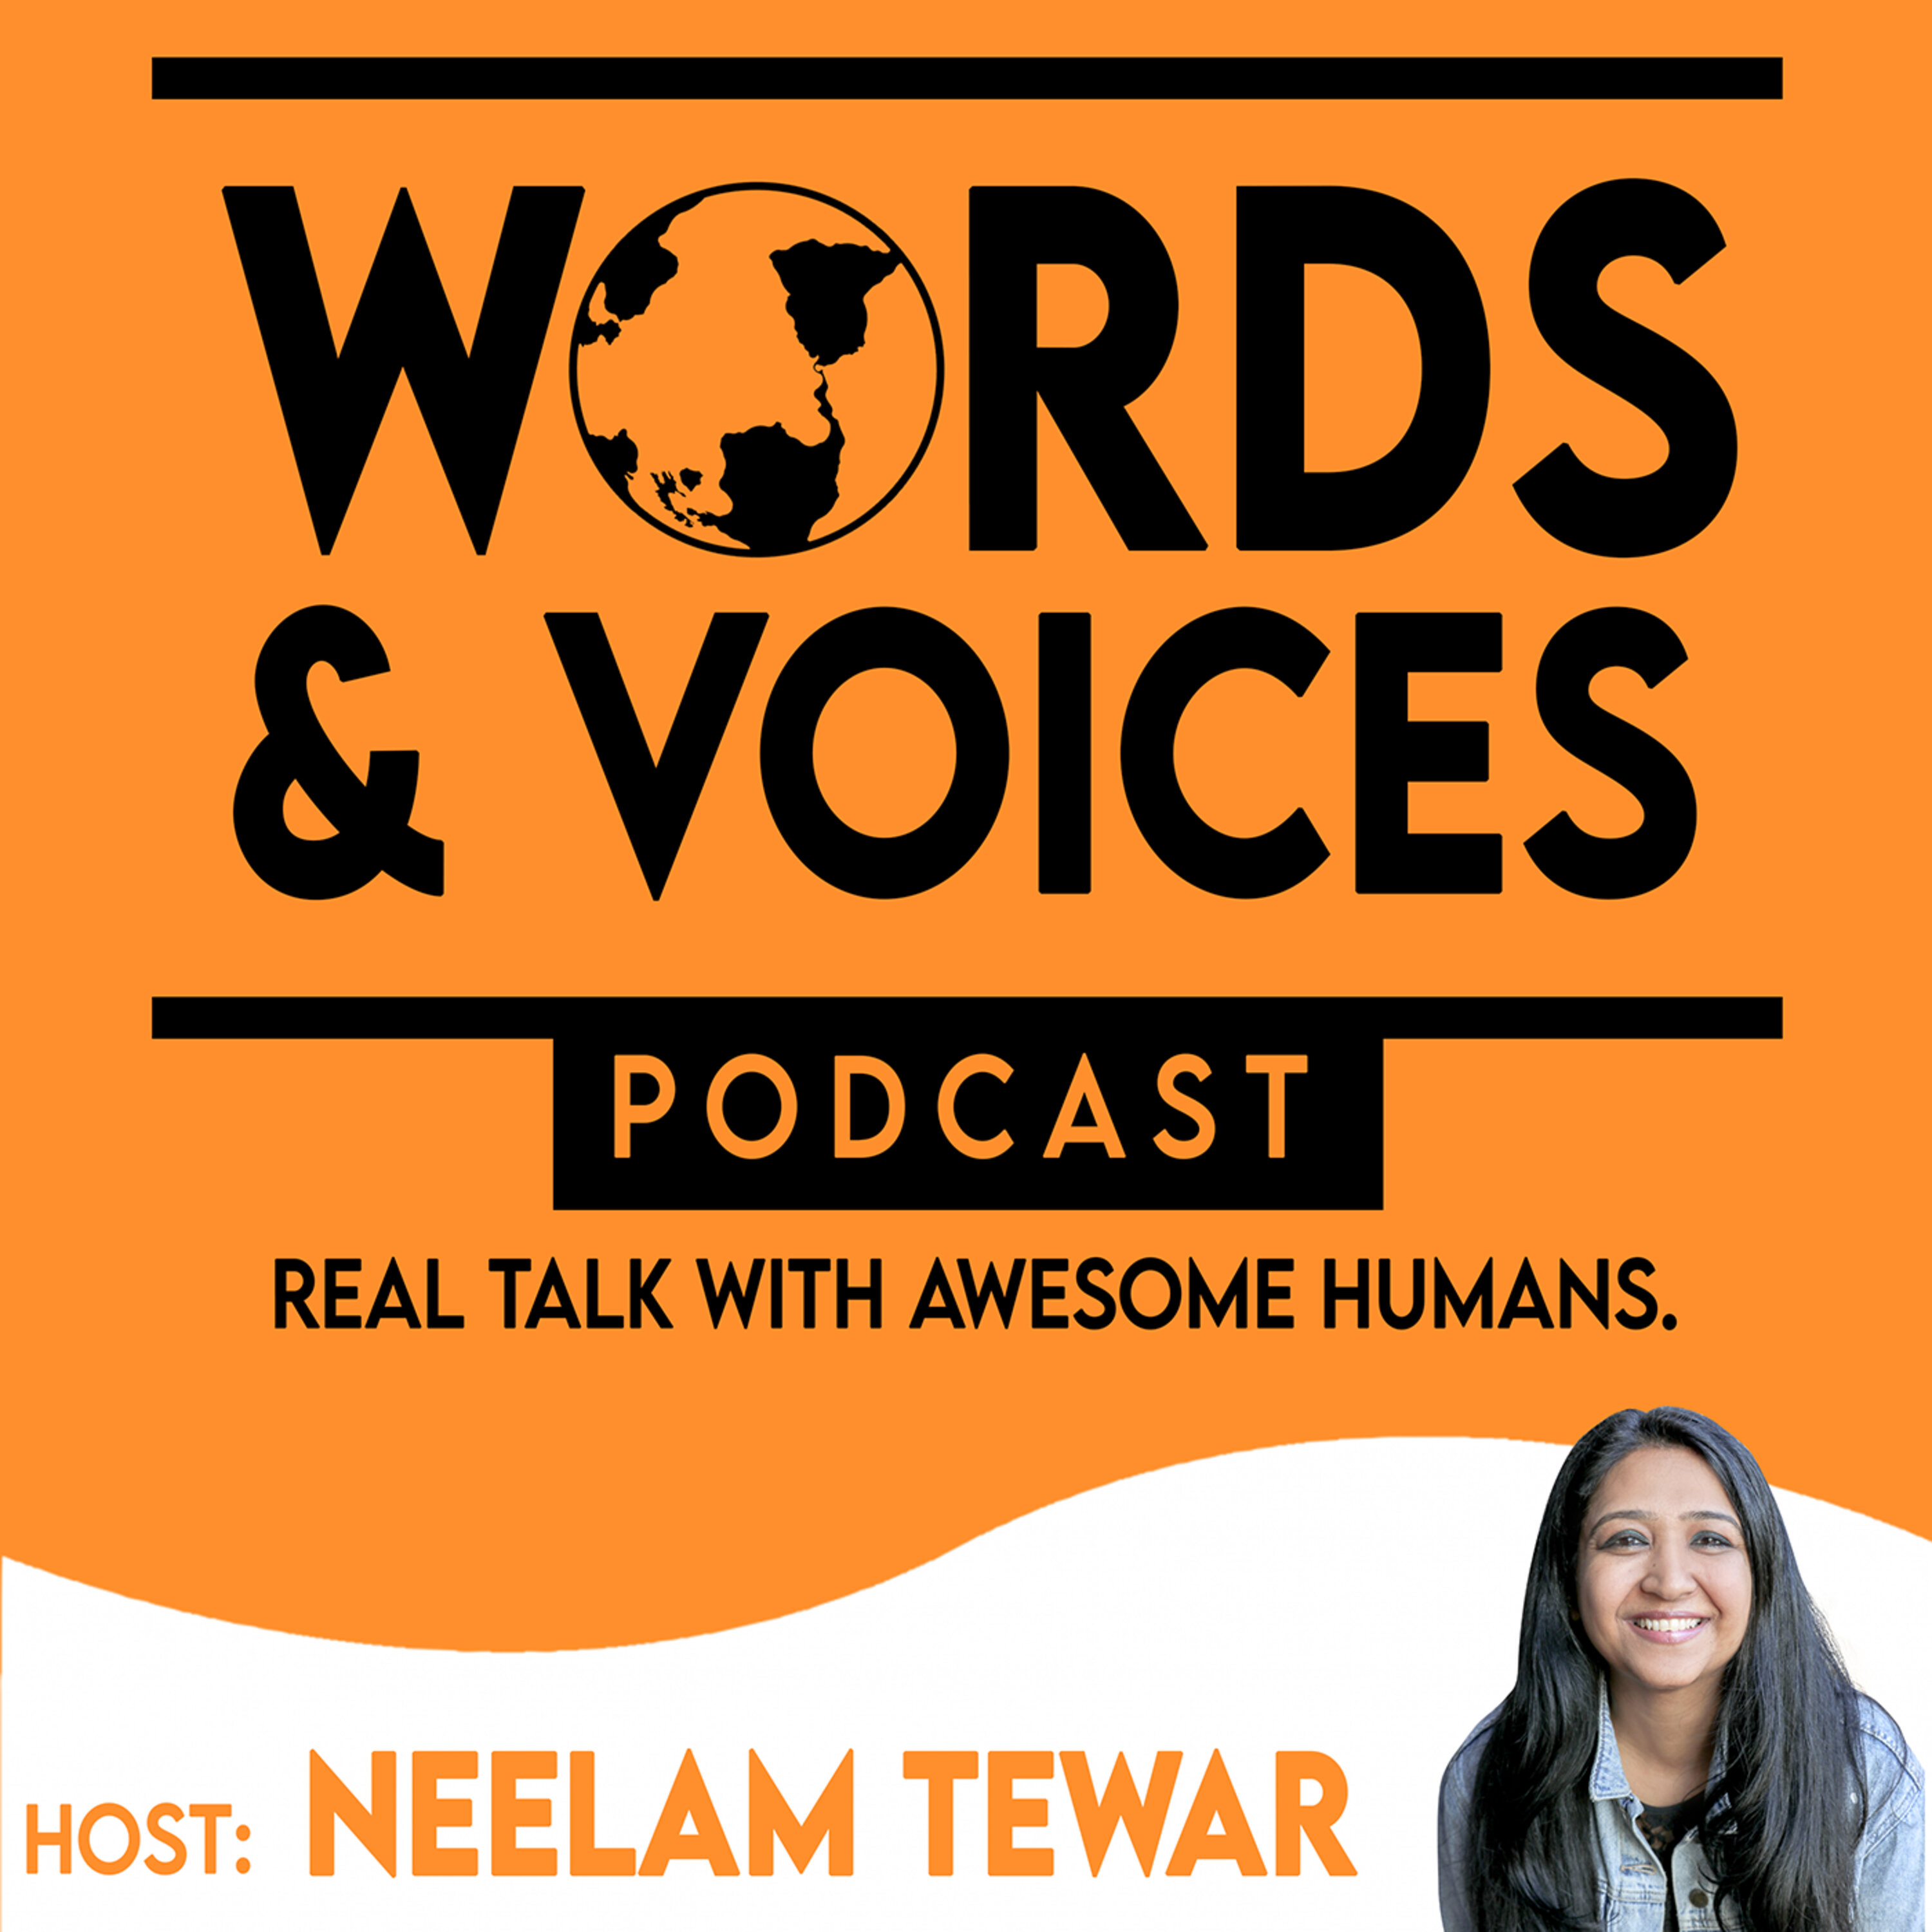 Words & Voices Podcast